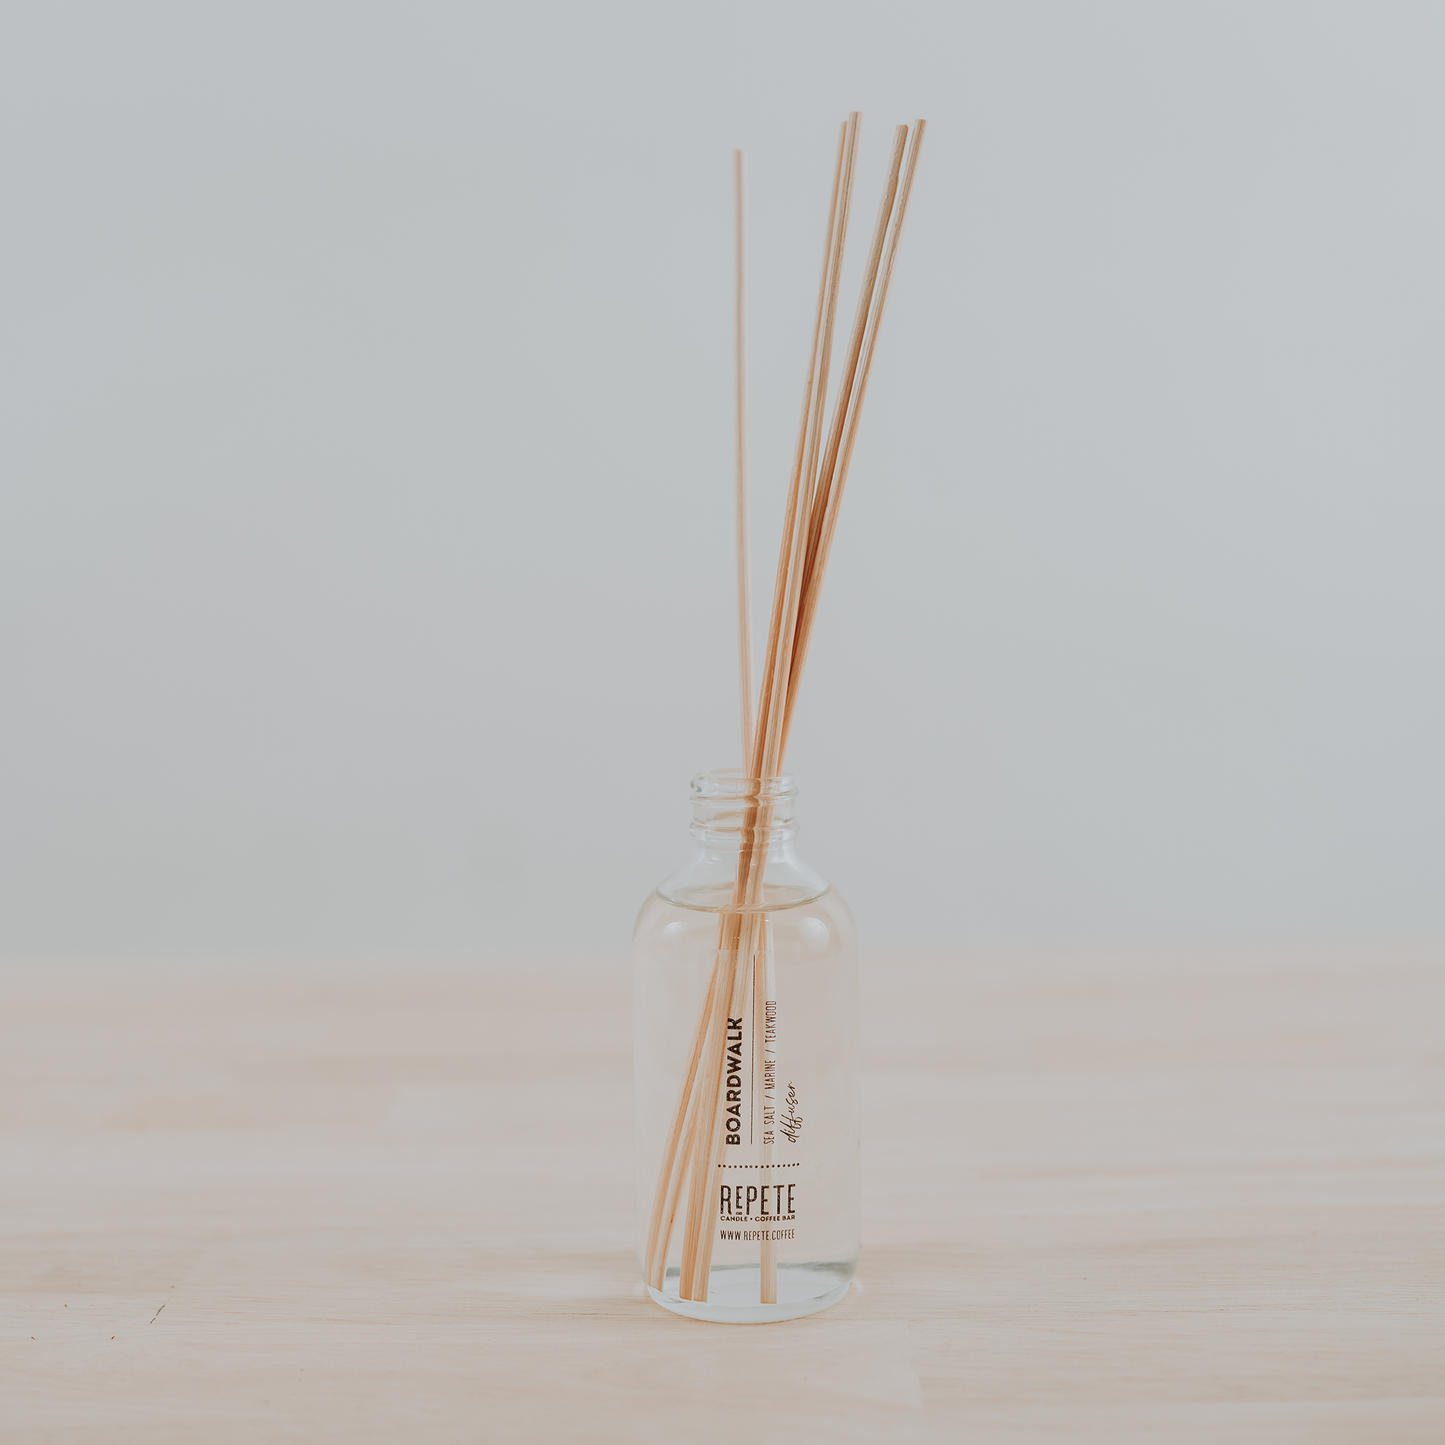 Boardwalk diffuser from Repete Candle and Coffee Bar